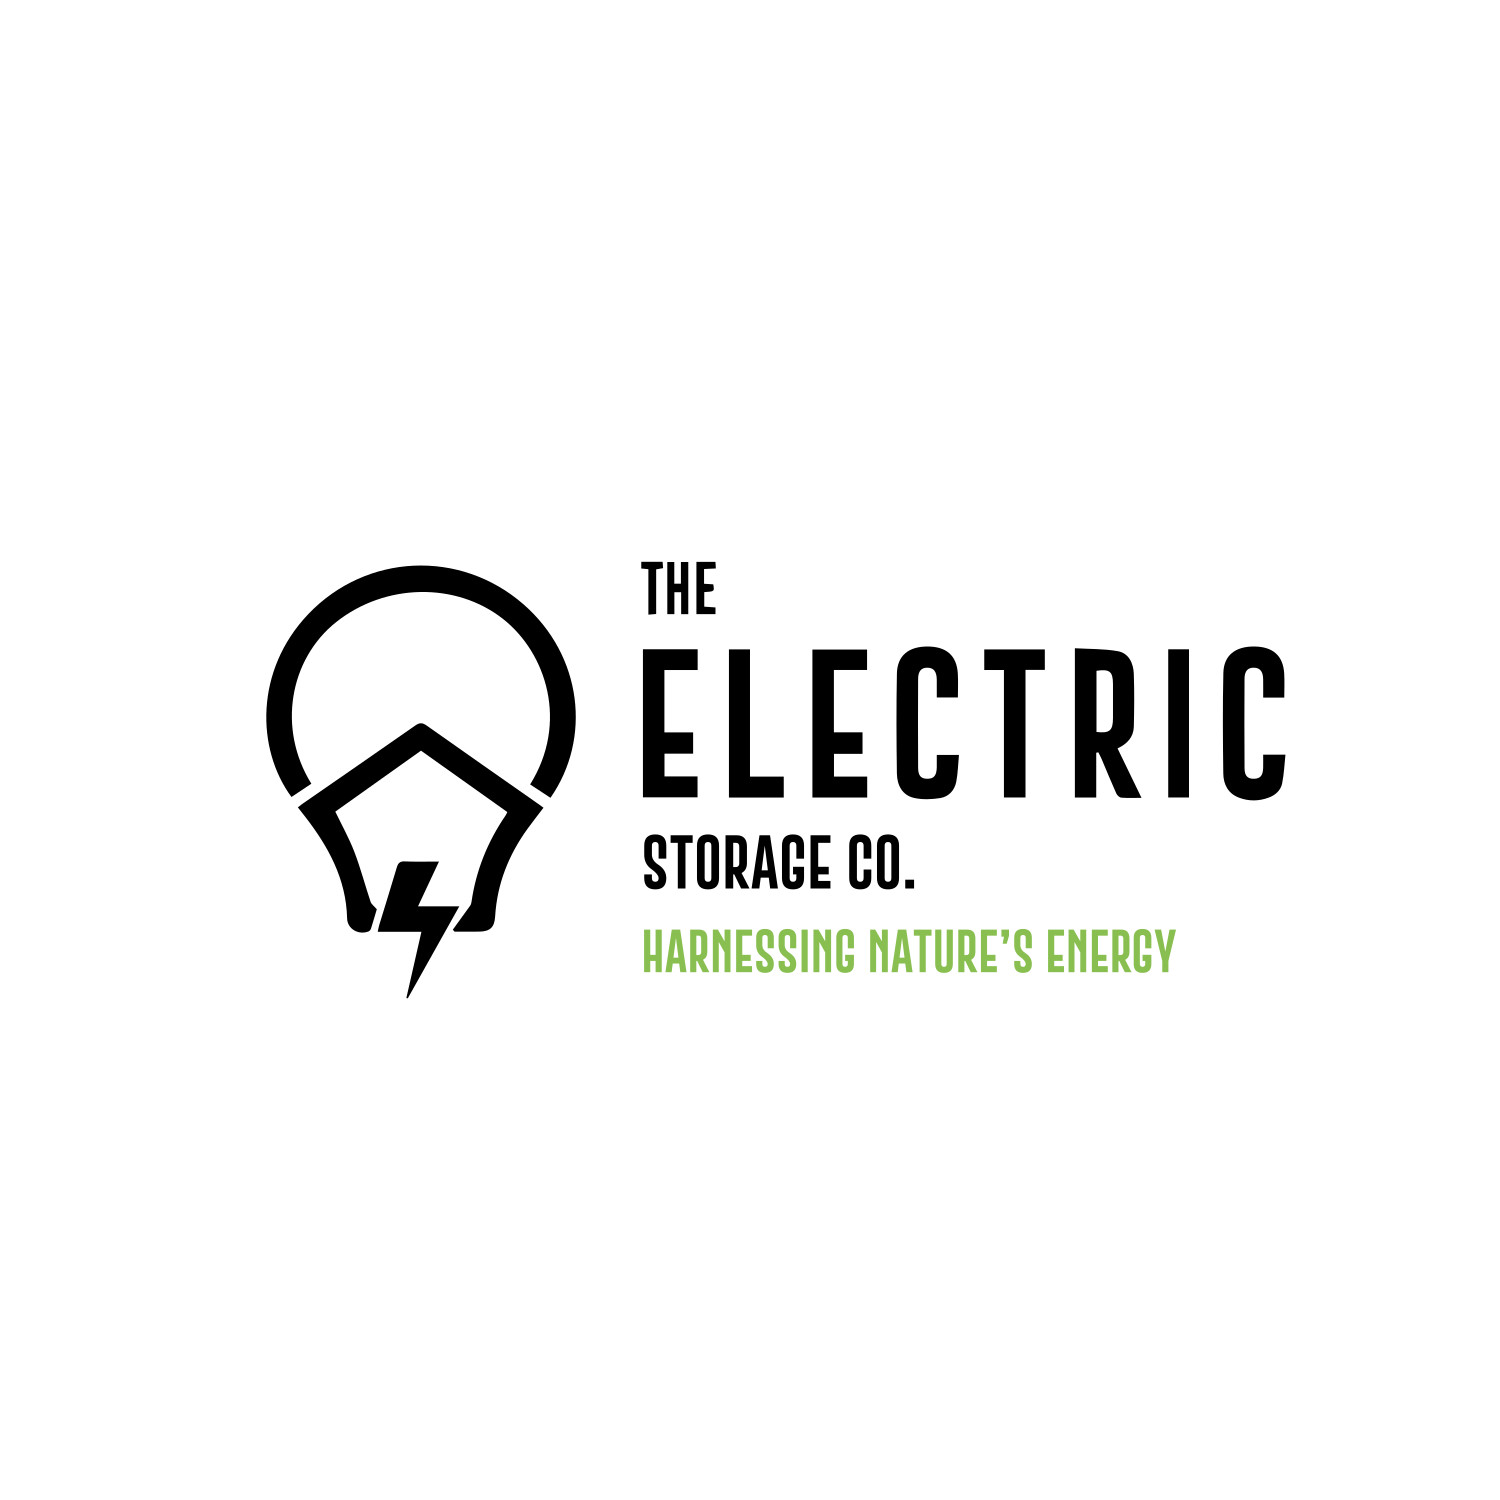 The Electric Storage Company